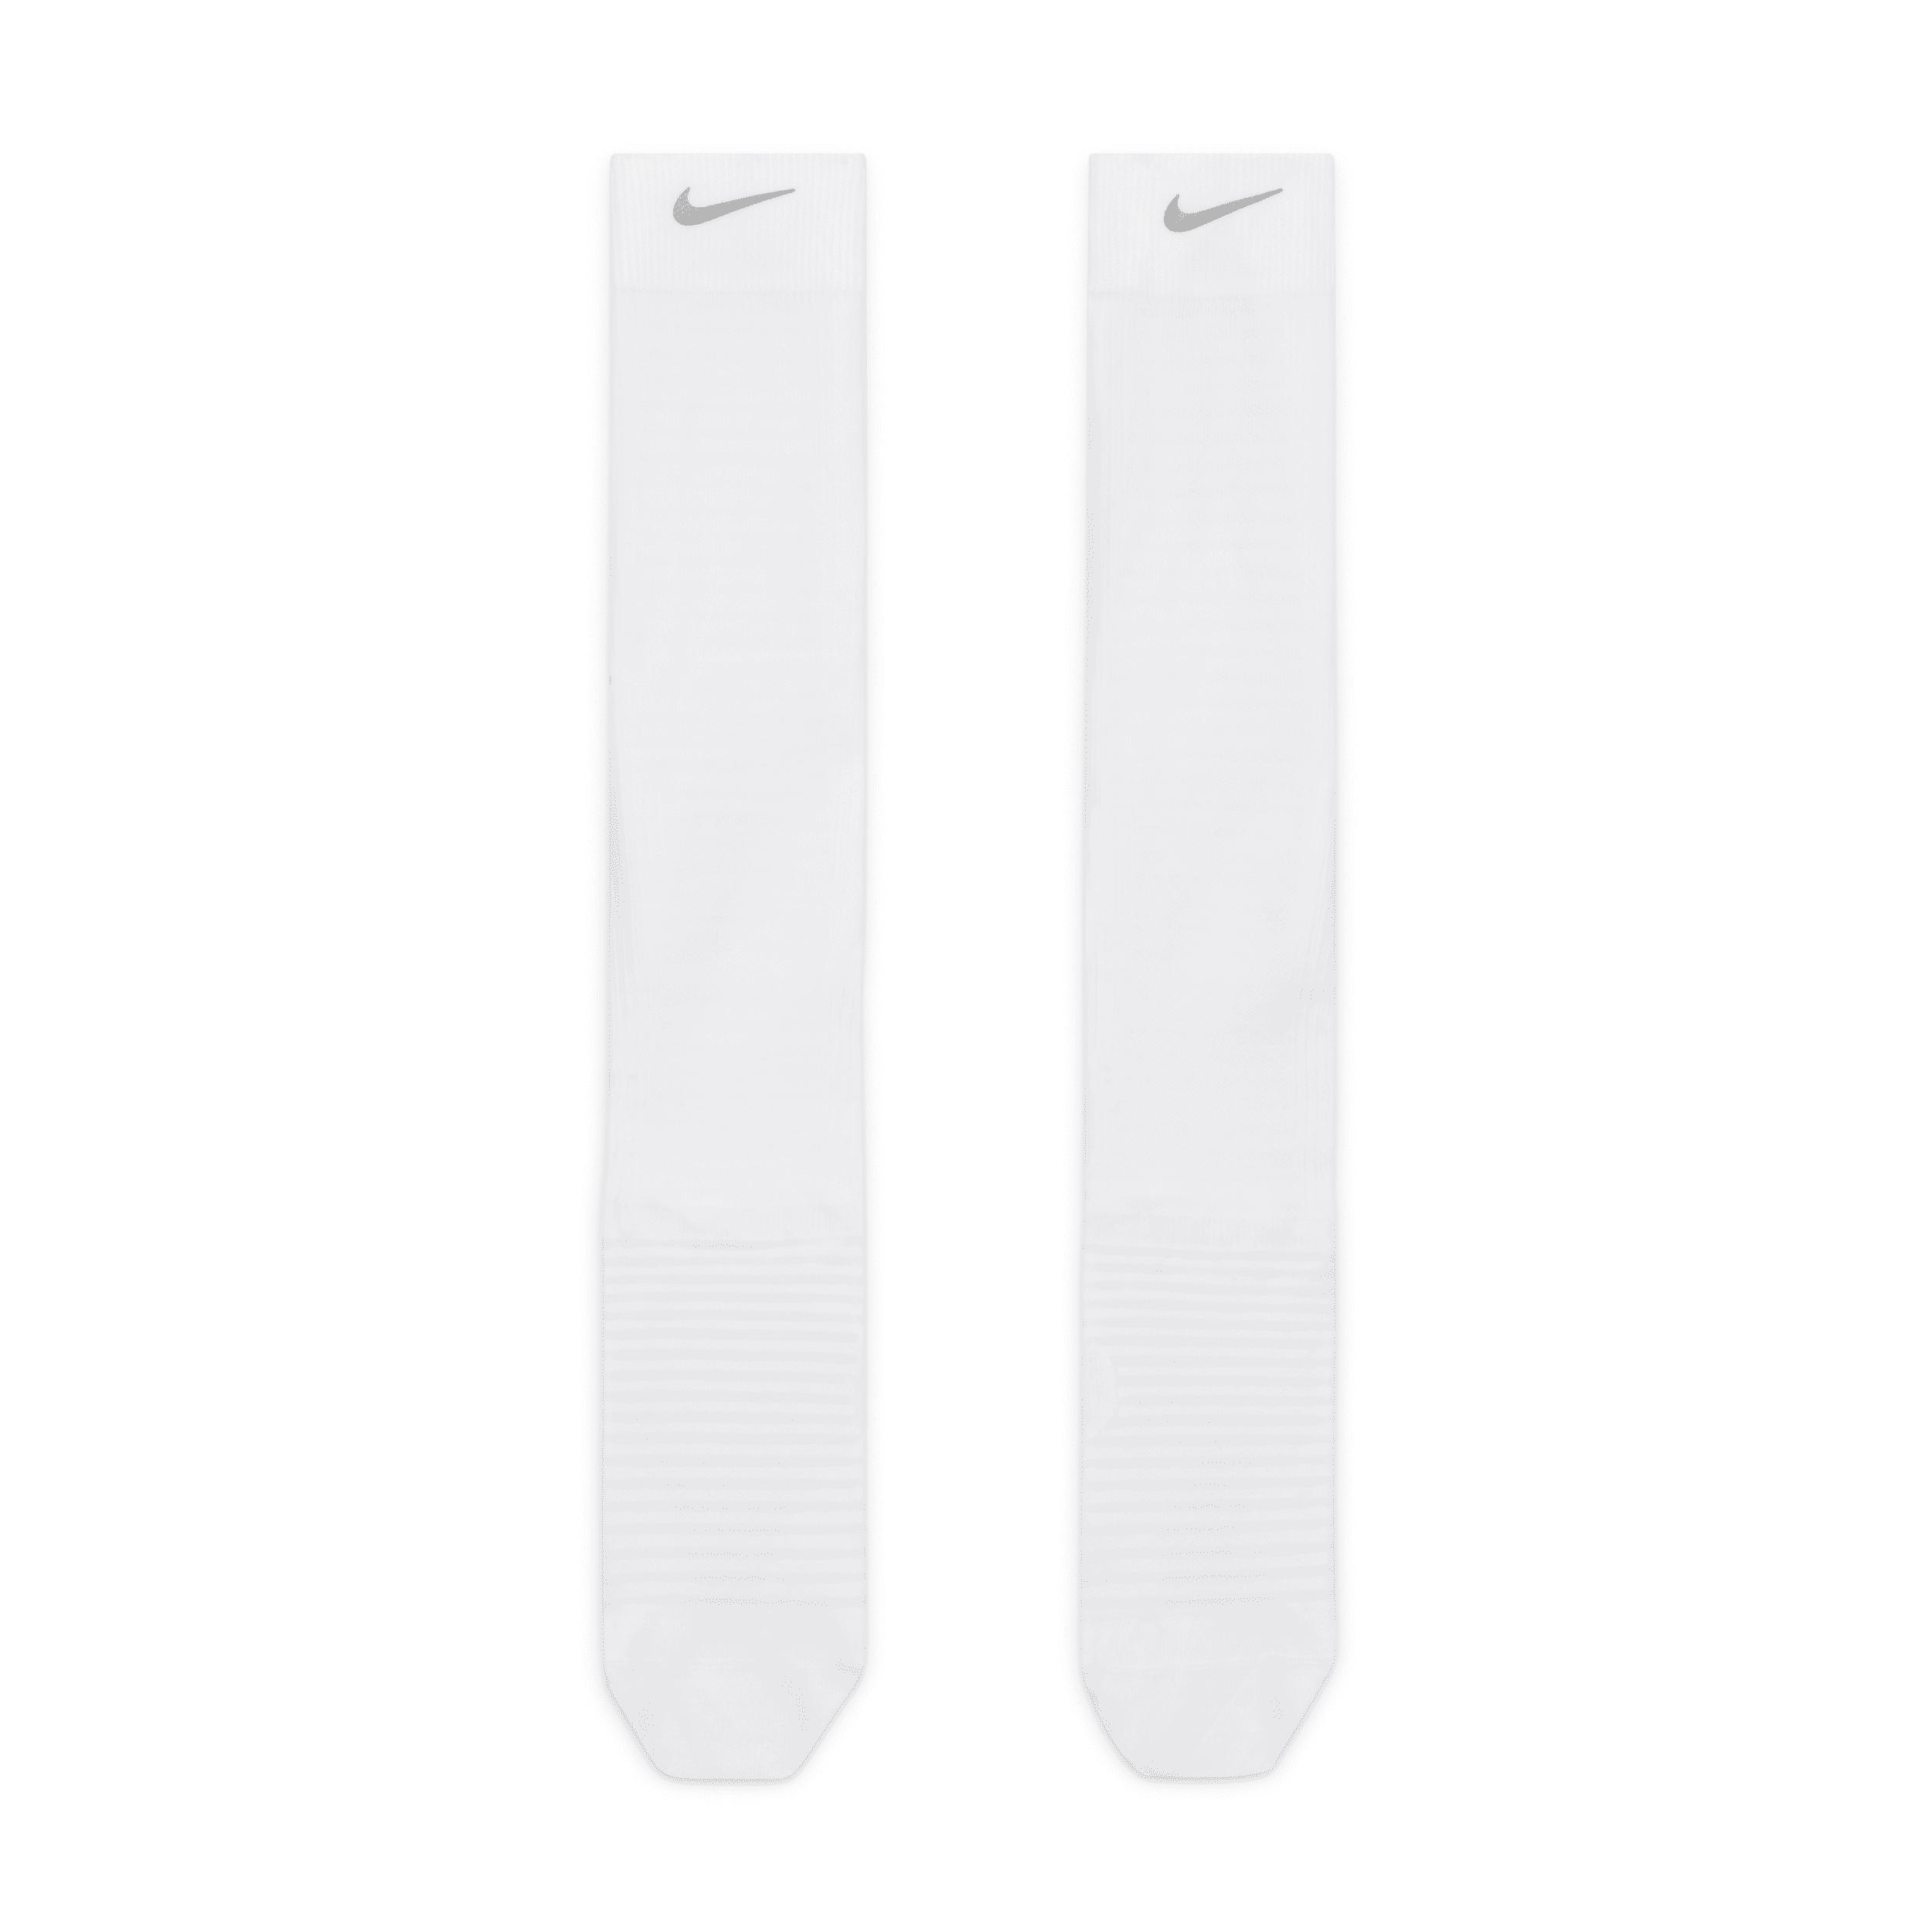 Nike Spark Lightweight Over-the-calf Compression Running Socks in White |  Lyst